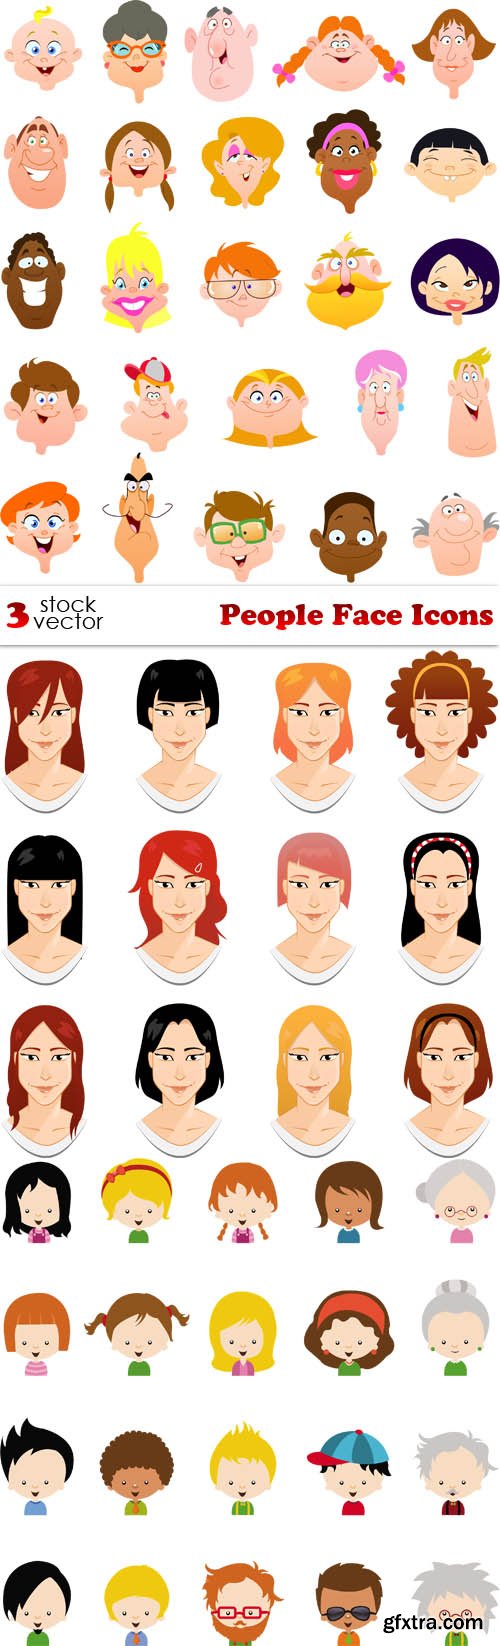 Vectors - People Face Icons